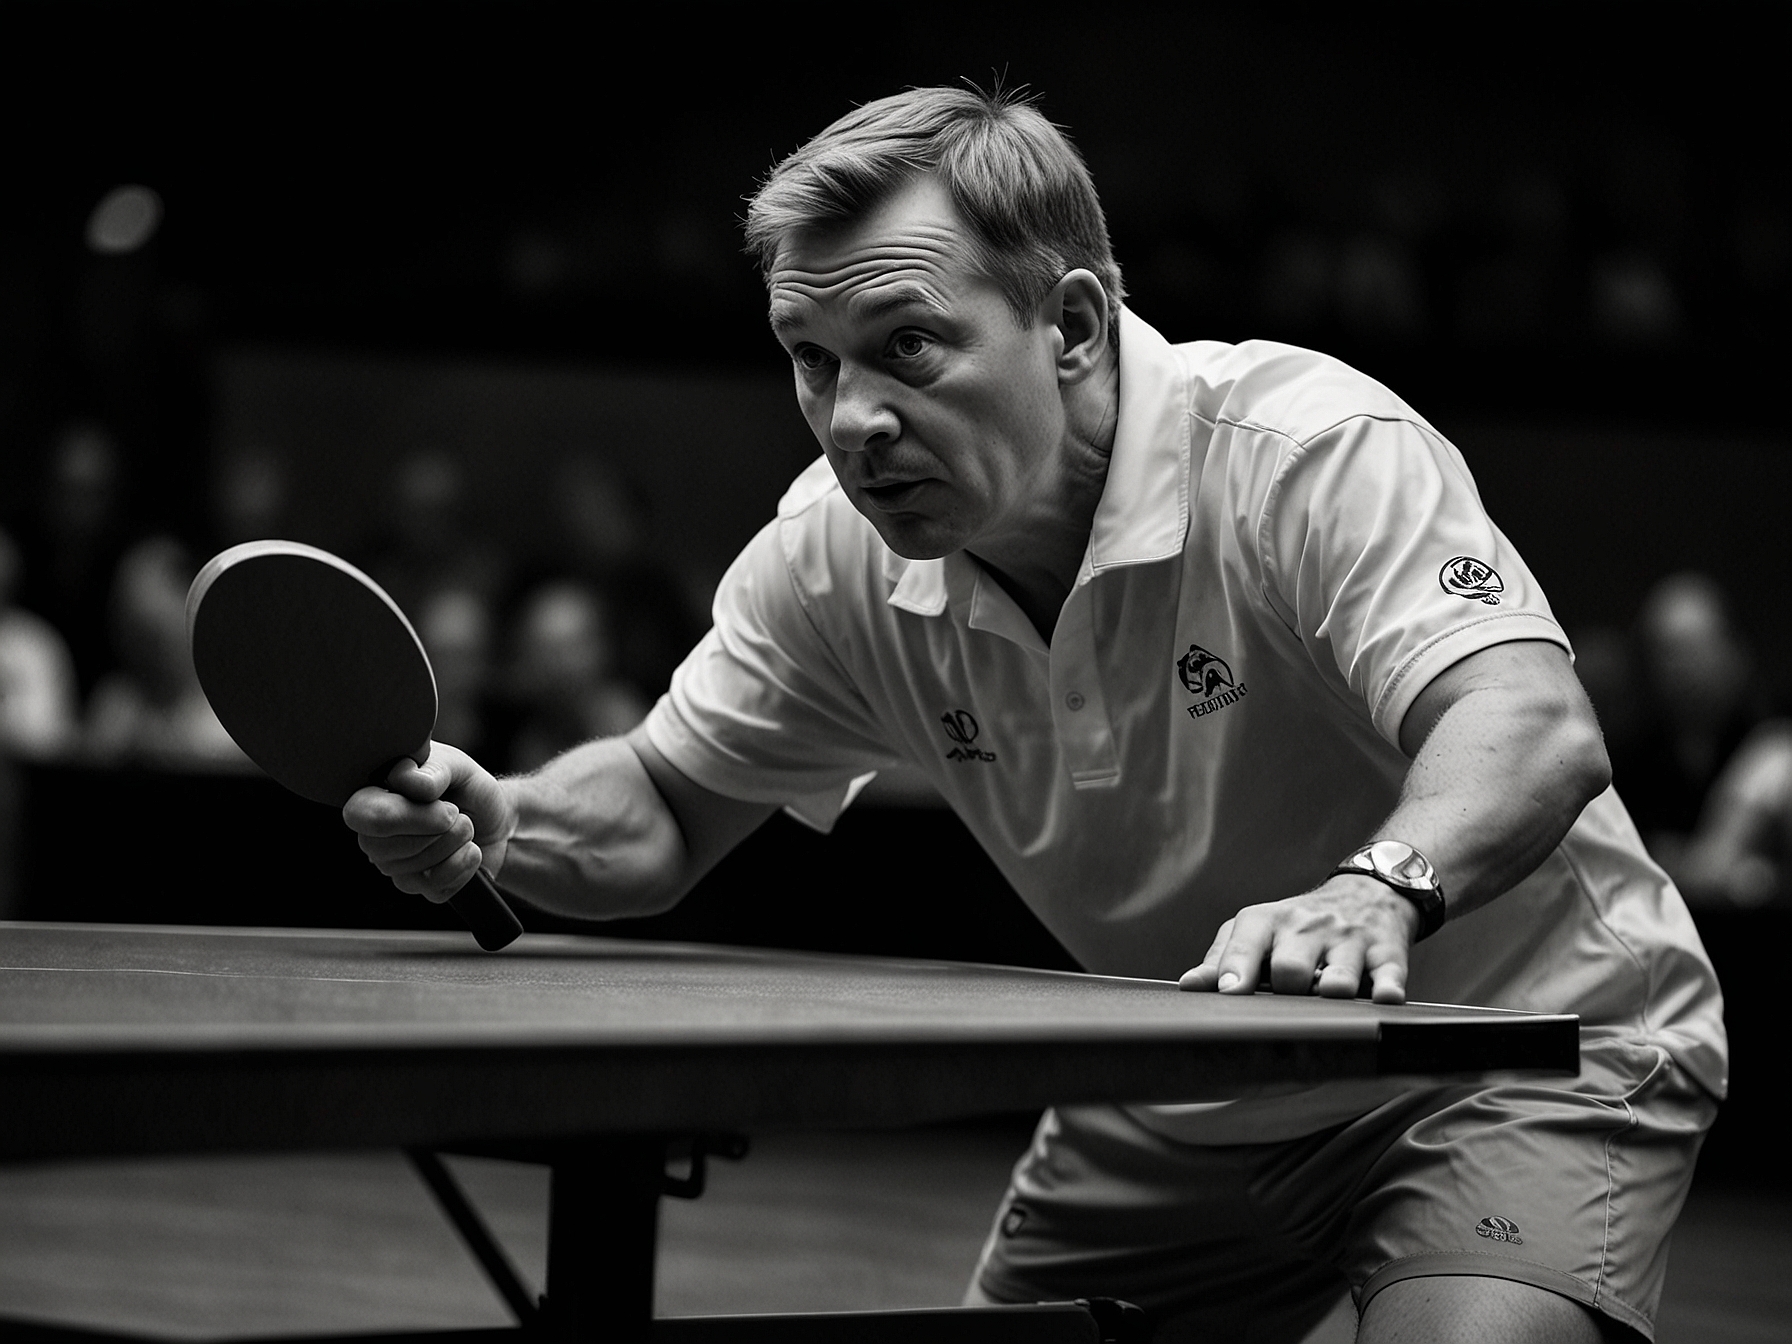 Martin Perry is shown in intense competition mode, demonstrating his powerful shots and strategic thinking during an international para table tennis tournament.